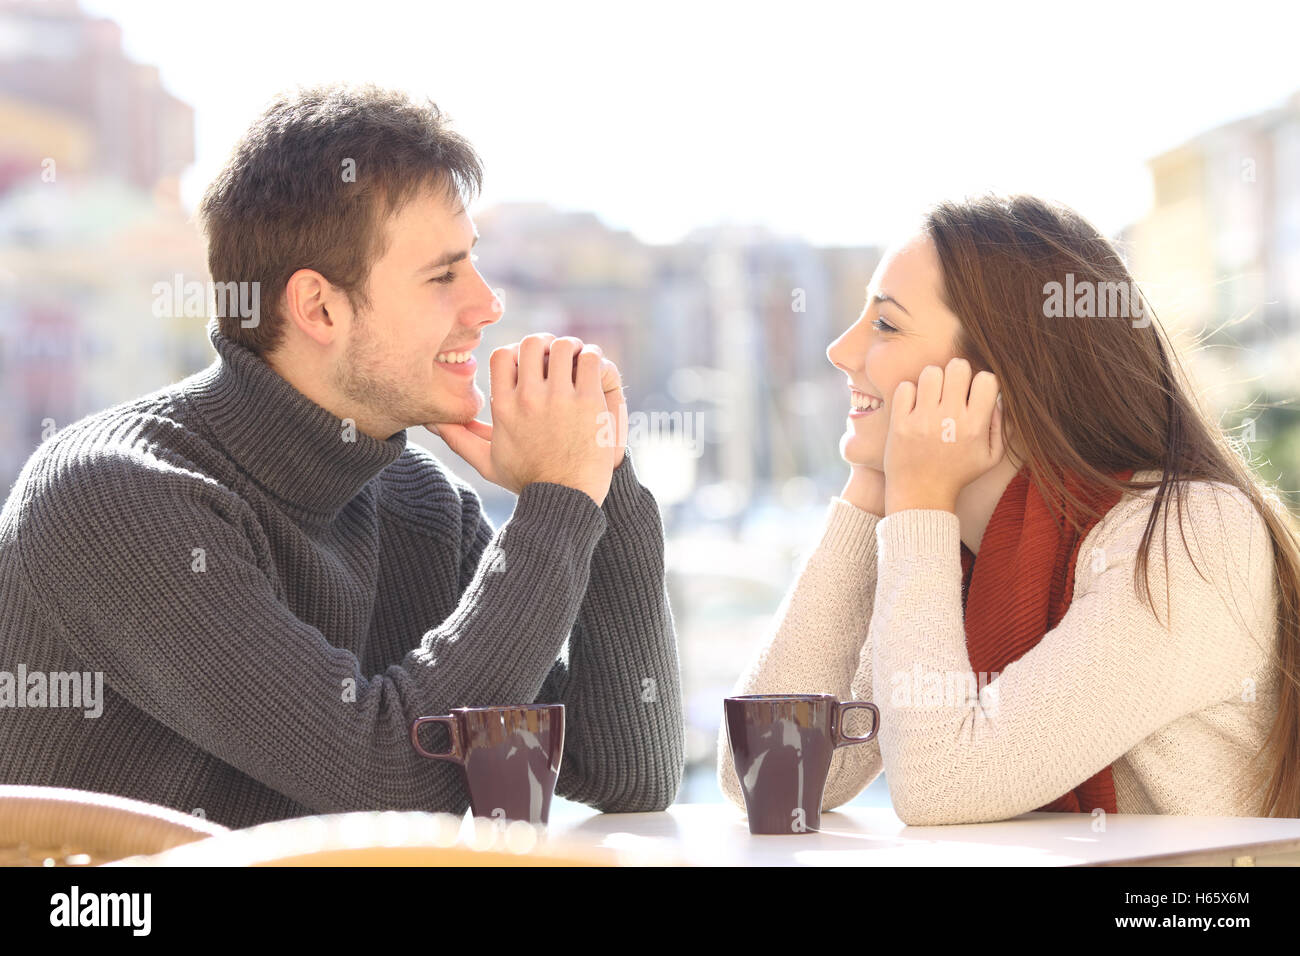 Side view of a happy couple dating and flirting in love looking each other in a bar terrace with a port of urbanization Stock Photo